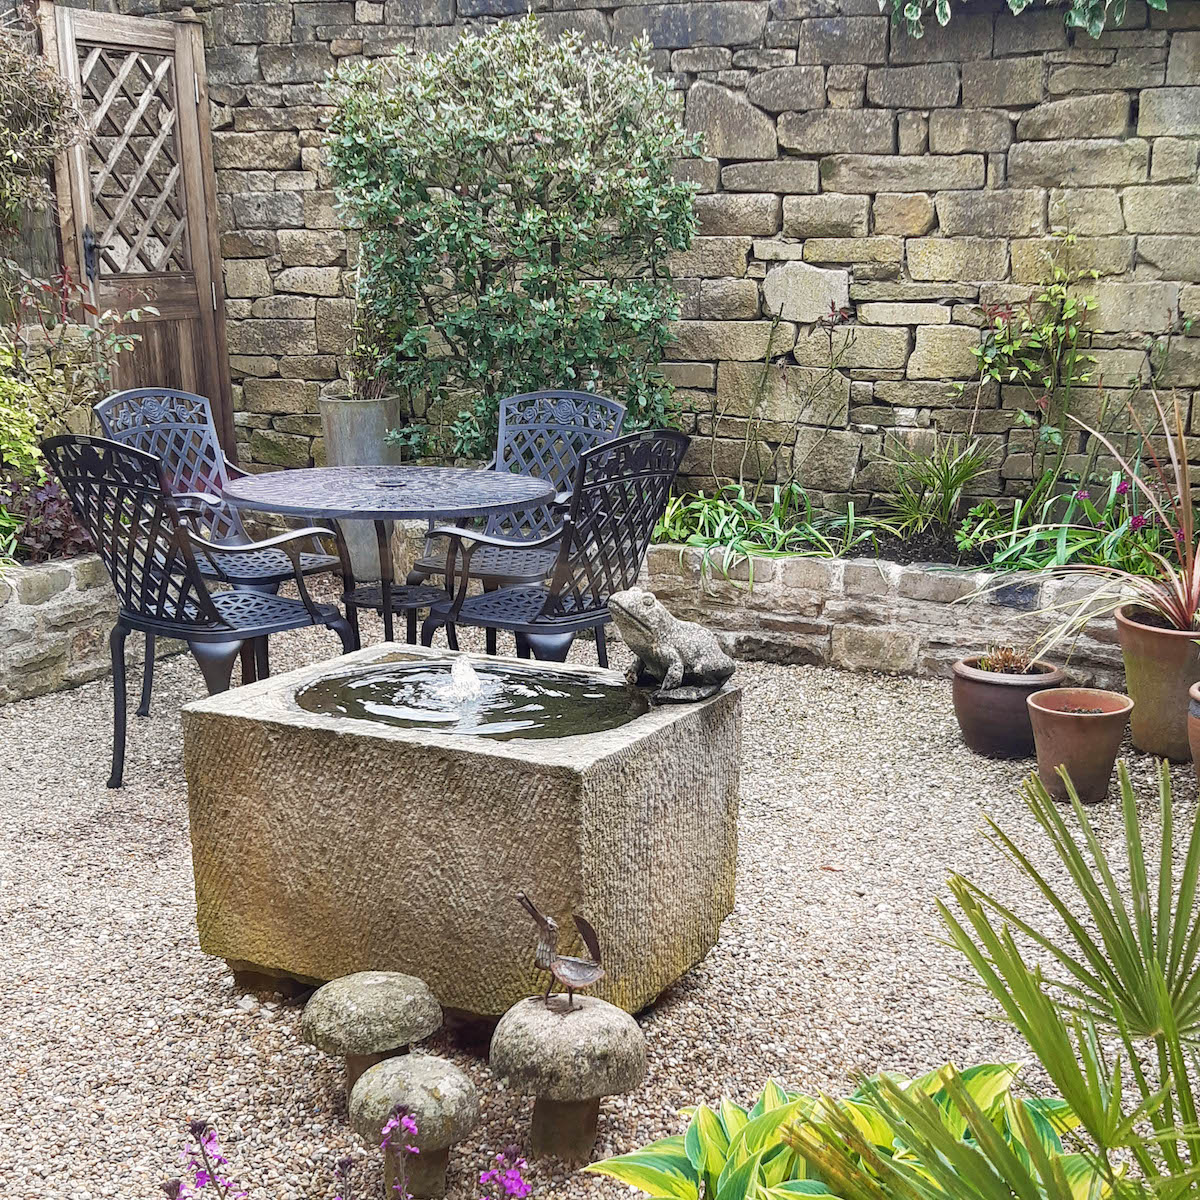 Add a water feature with our Mia Garden Table Set